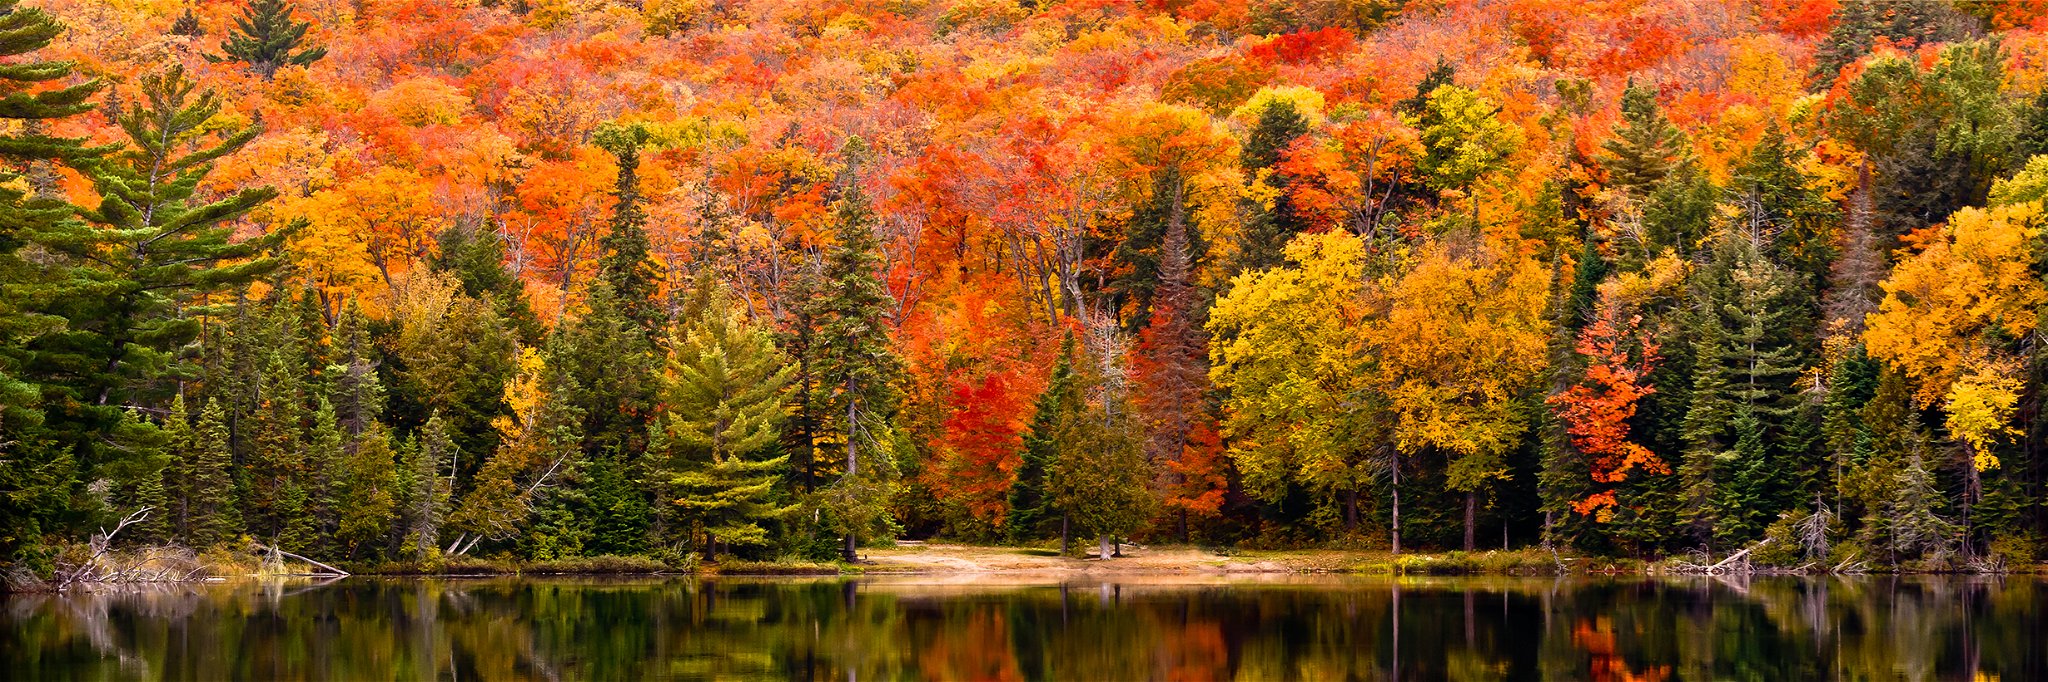 Algonquin Park, Ontario, is a perfect place for leaf-peeping.